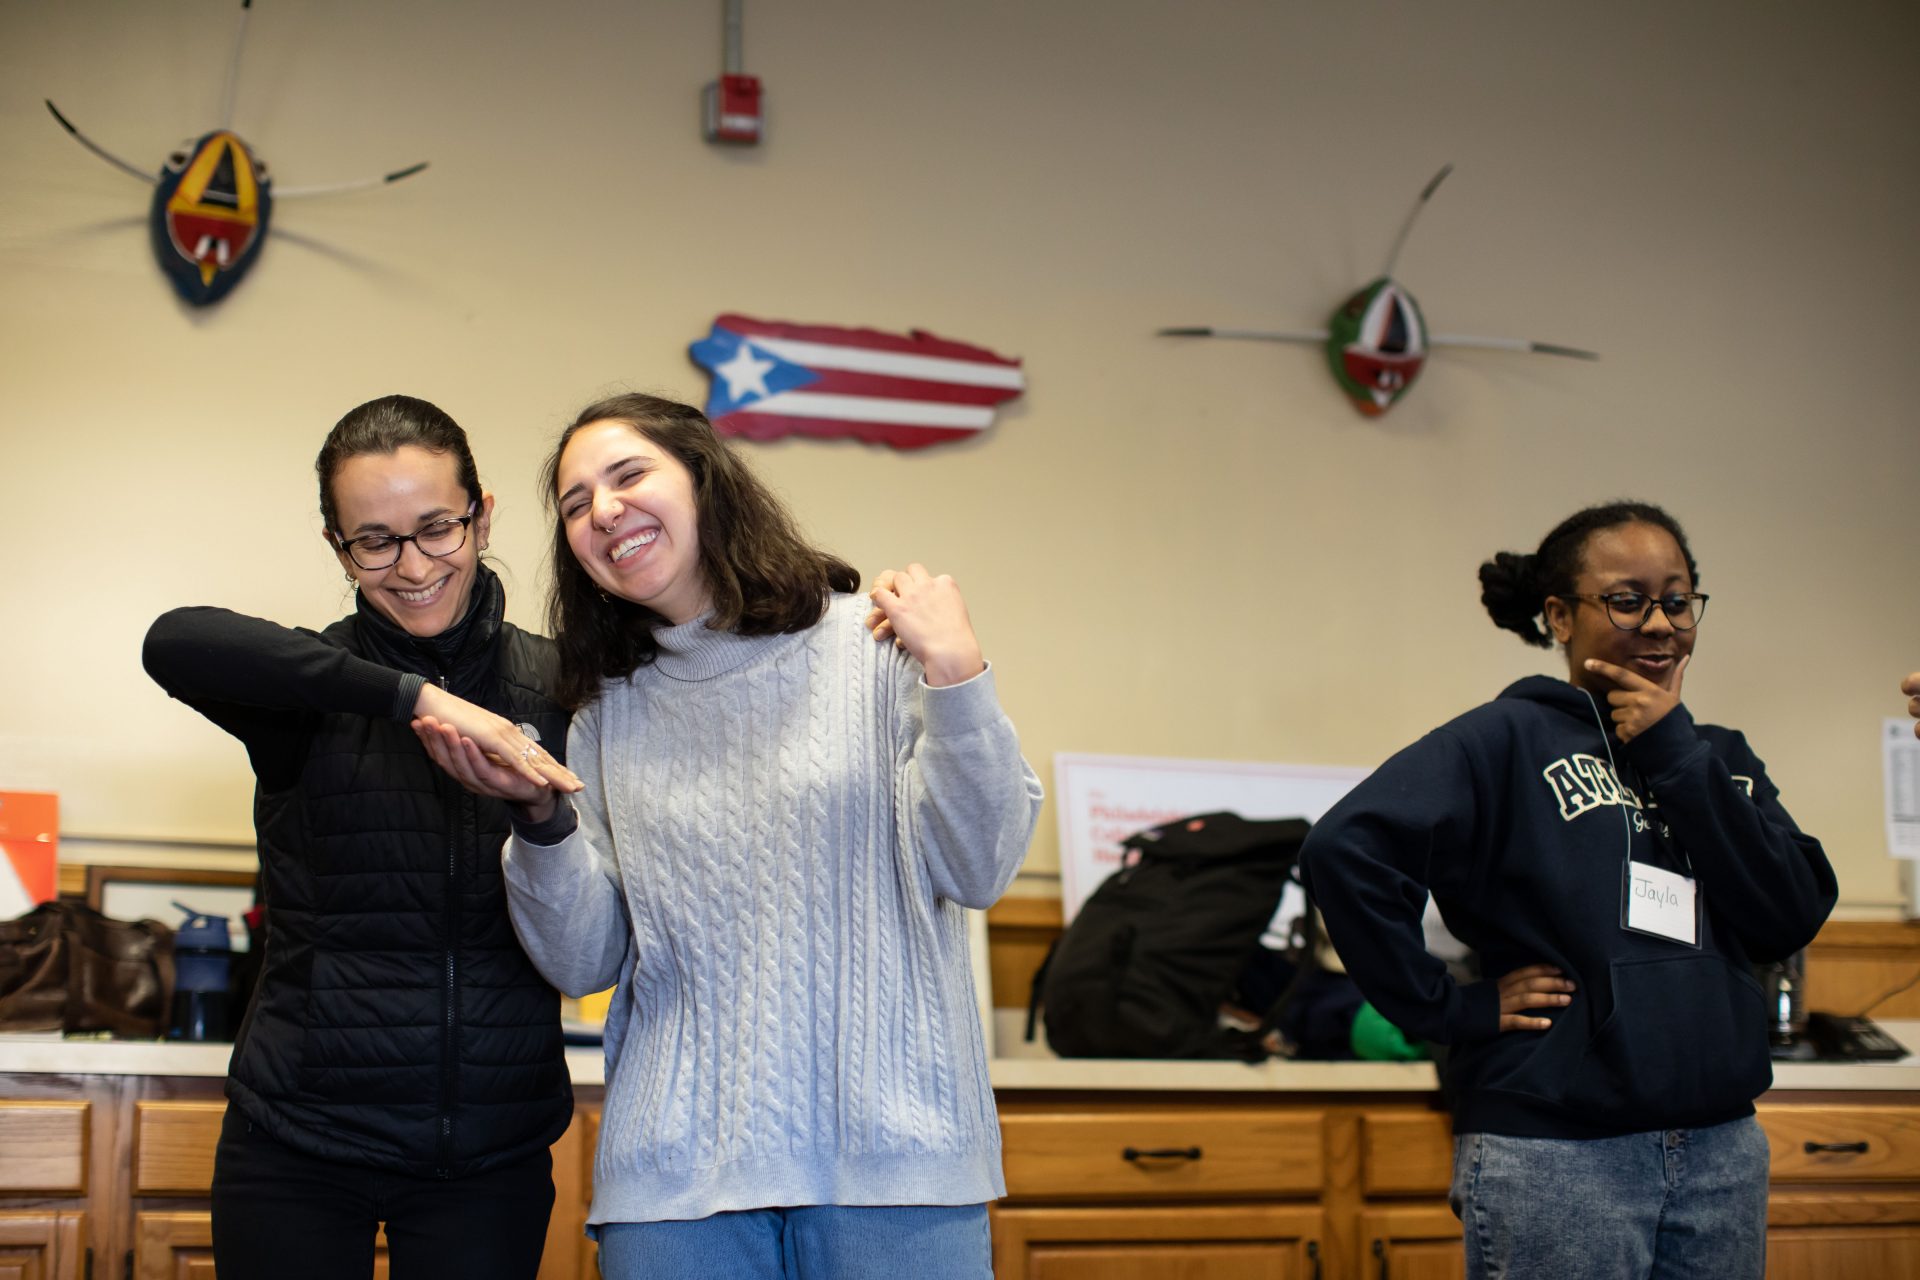 Andria Bibiloni and Laura Beery (left) participate in a warm-up exercise during rehearsal for the play "Count Me In," a forum theater project meant to encourage participation in the 2020 census among immigrant communities.